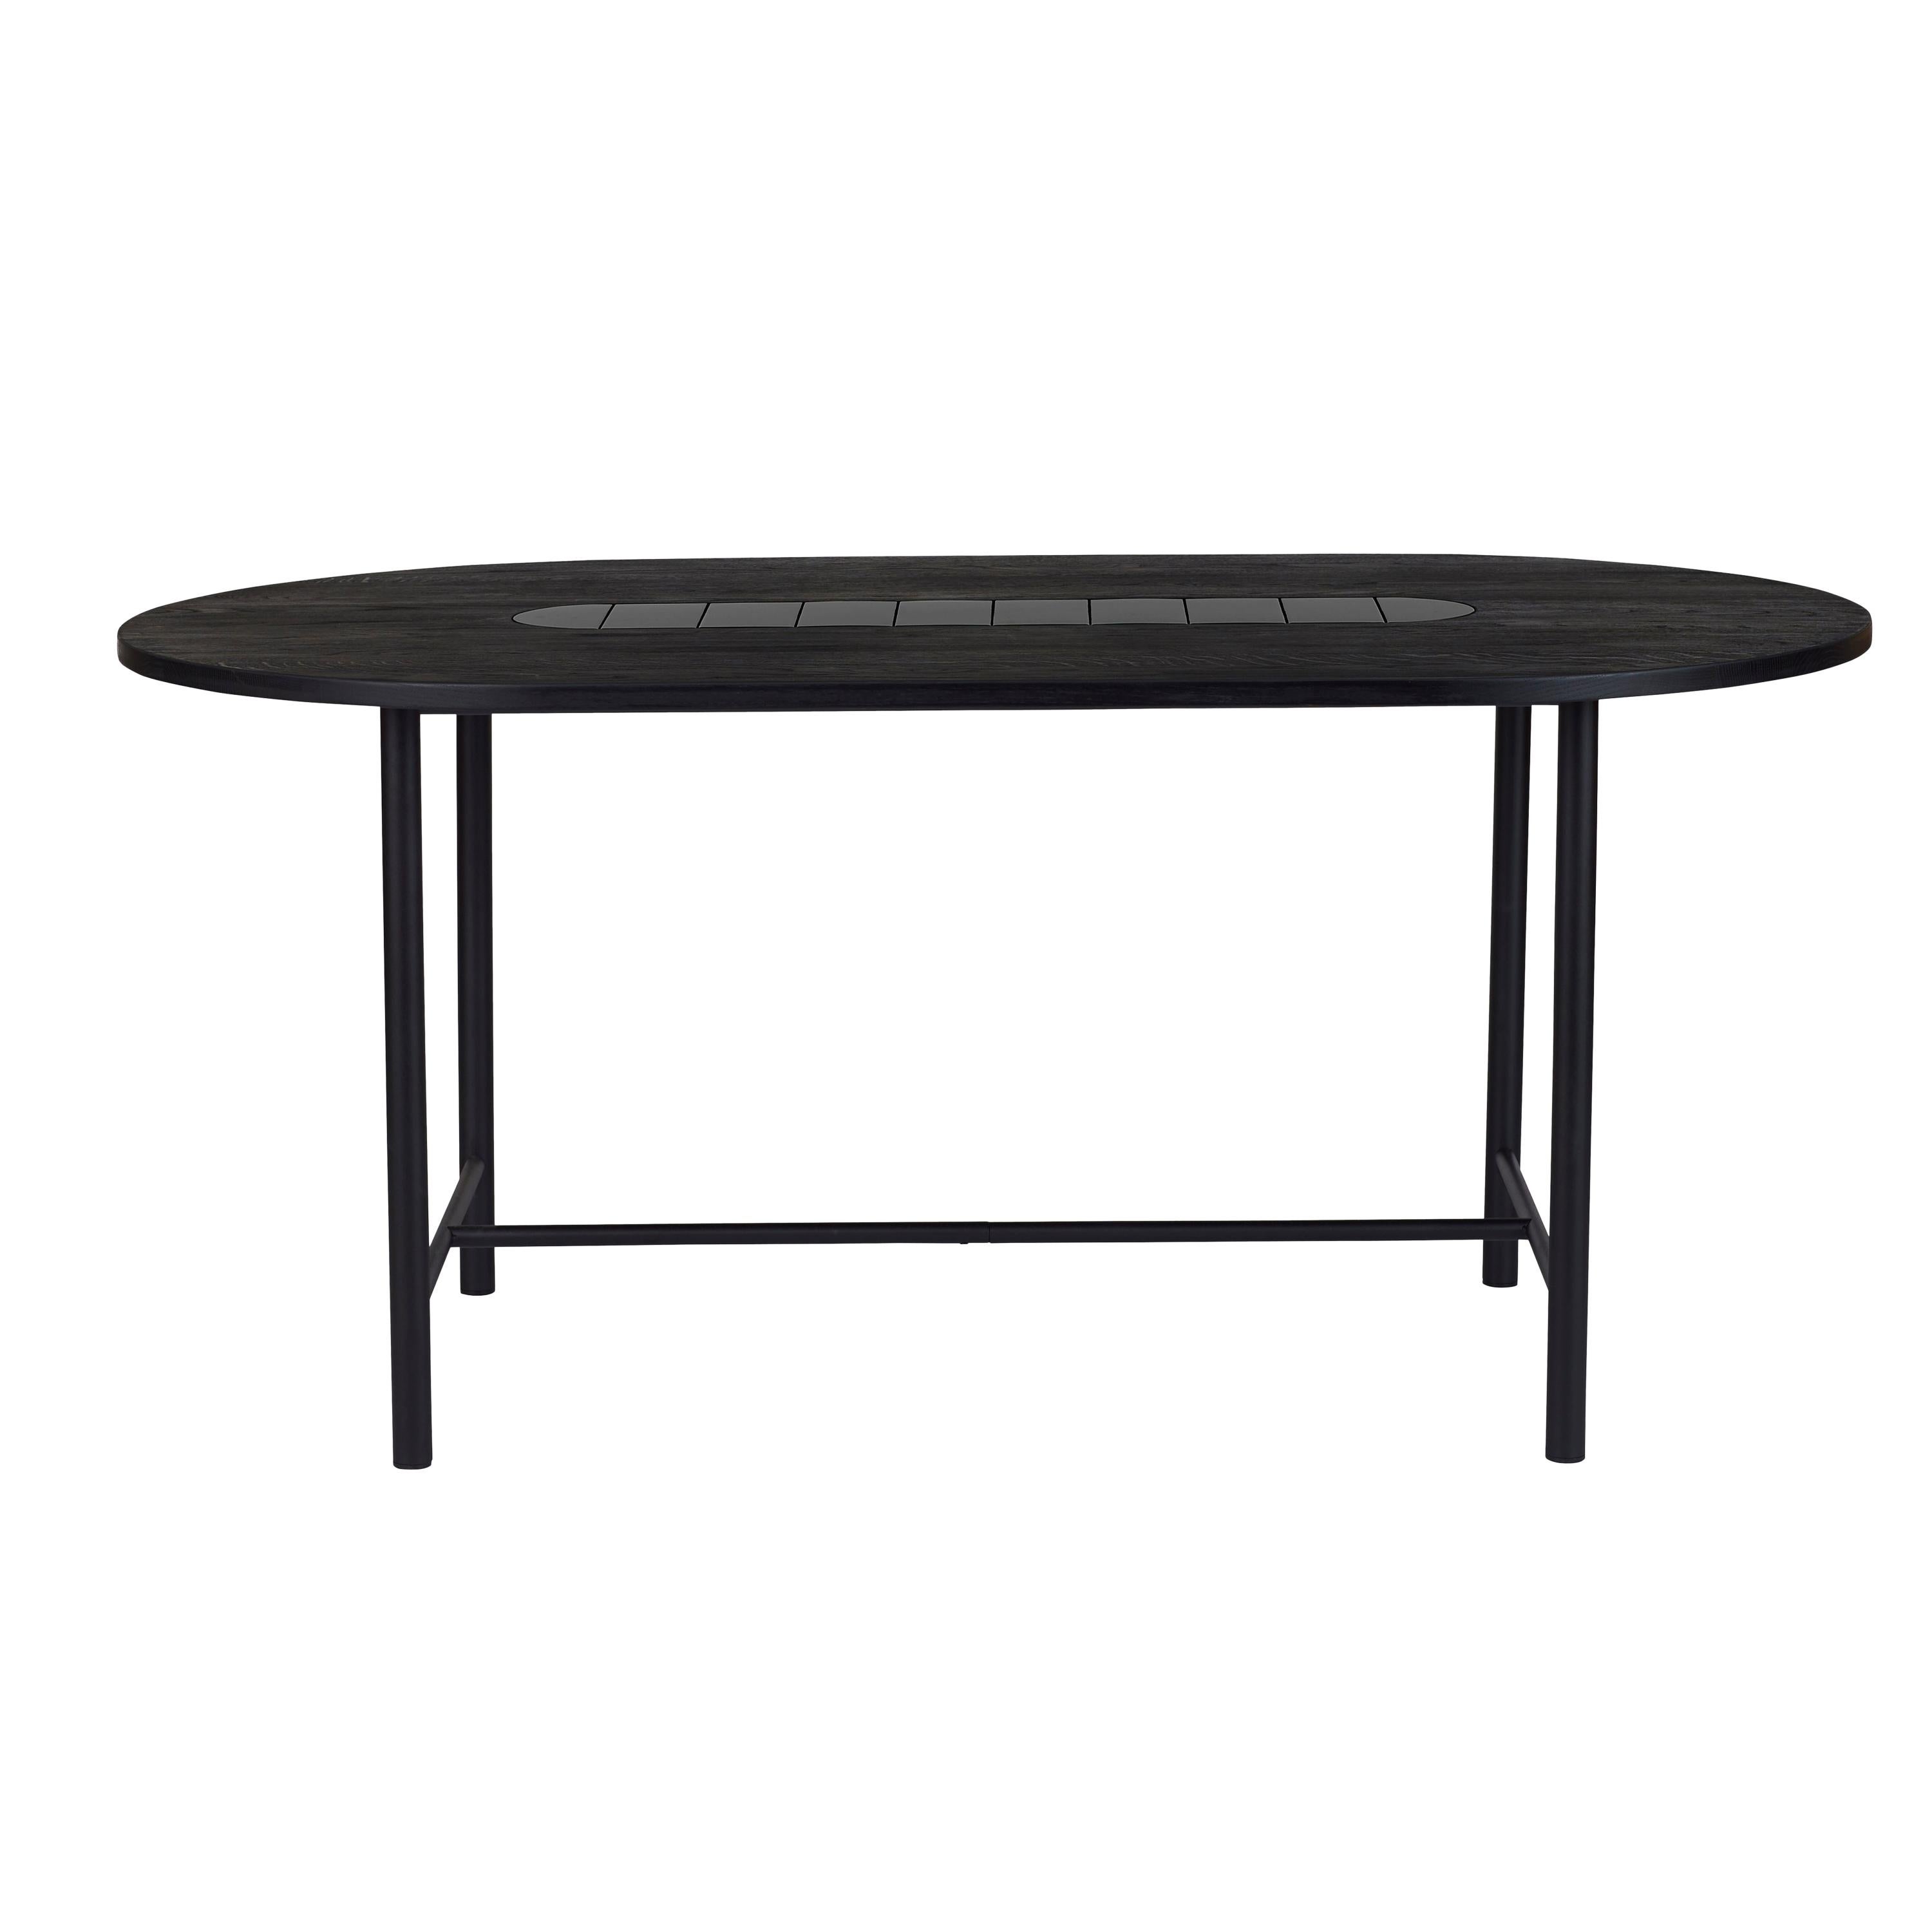 For Sale: Black (Soft black) Be My Guest Small Dining Table, by Charlotte Høncke from Warm Nordic